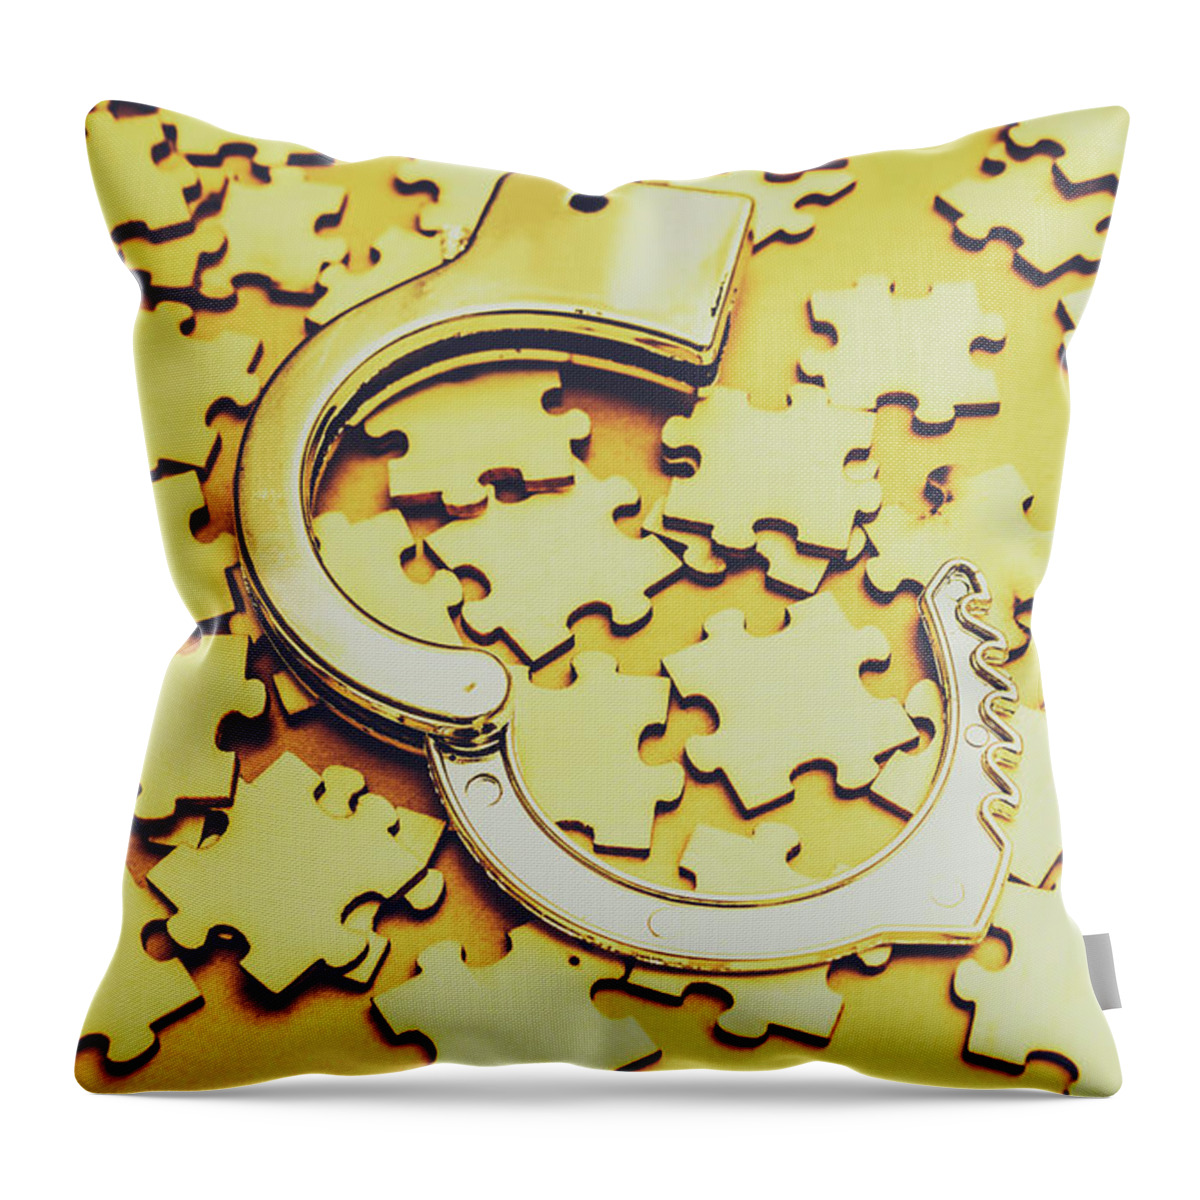 Open Throw Pillow featuring the photograph Scattered clues in a unsolved investigation by Jorgo Photography